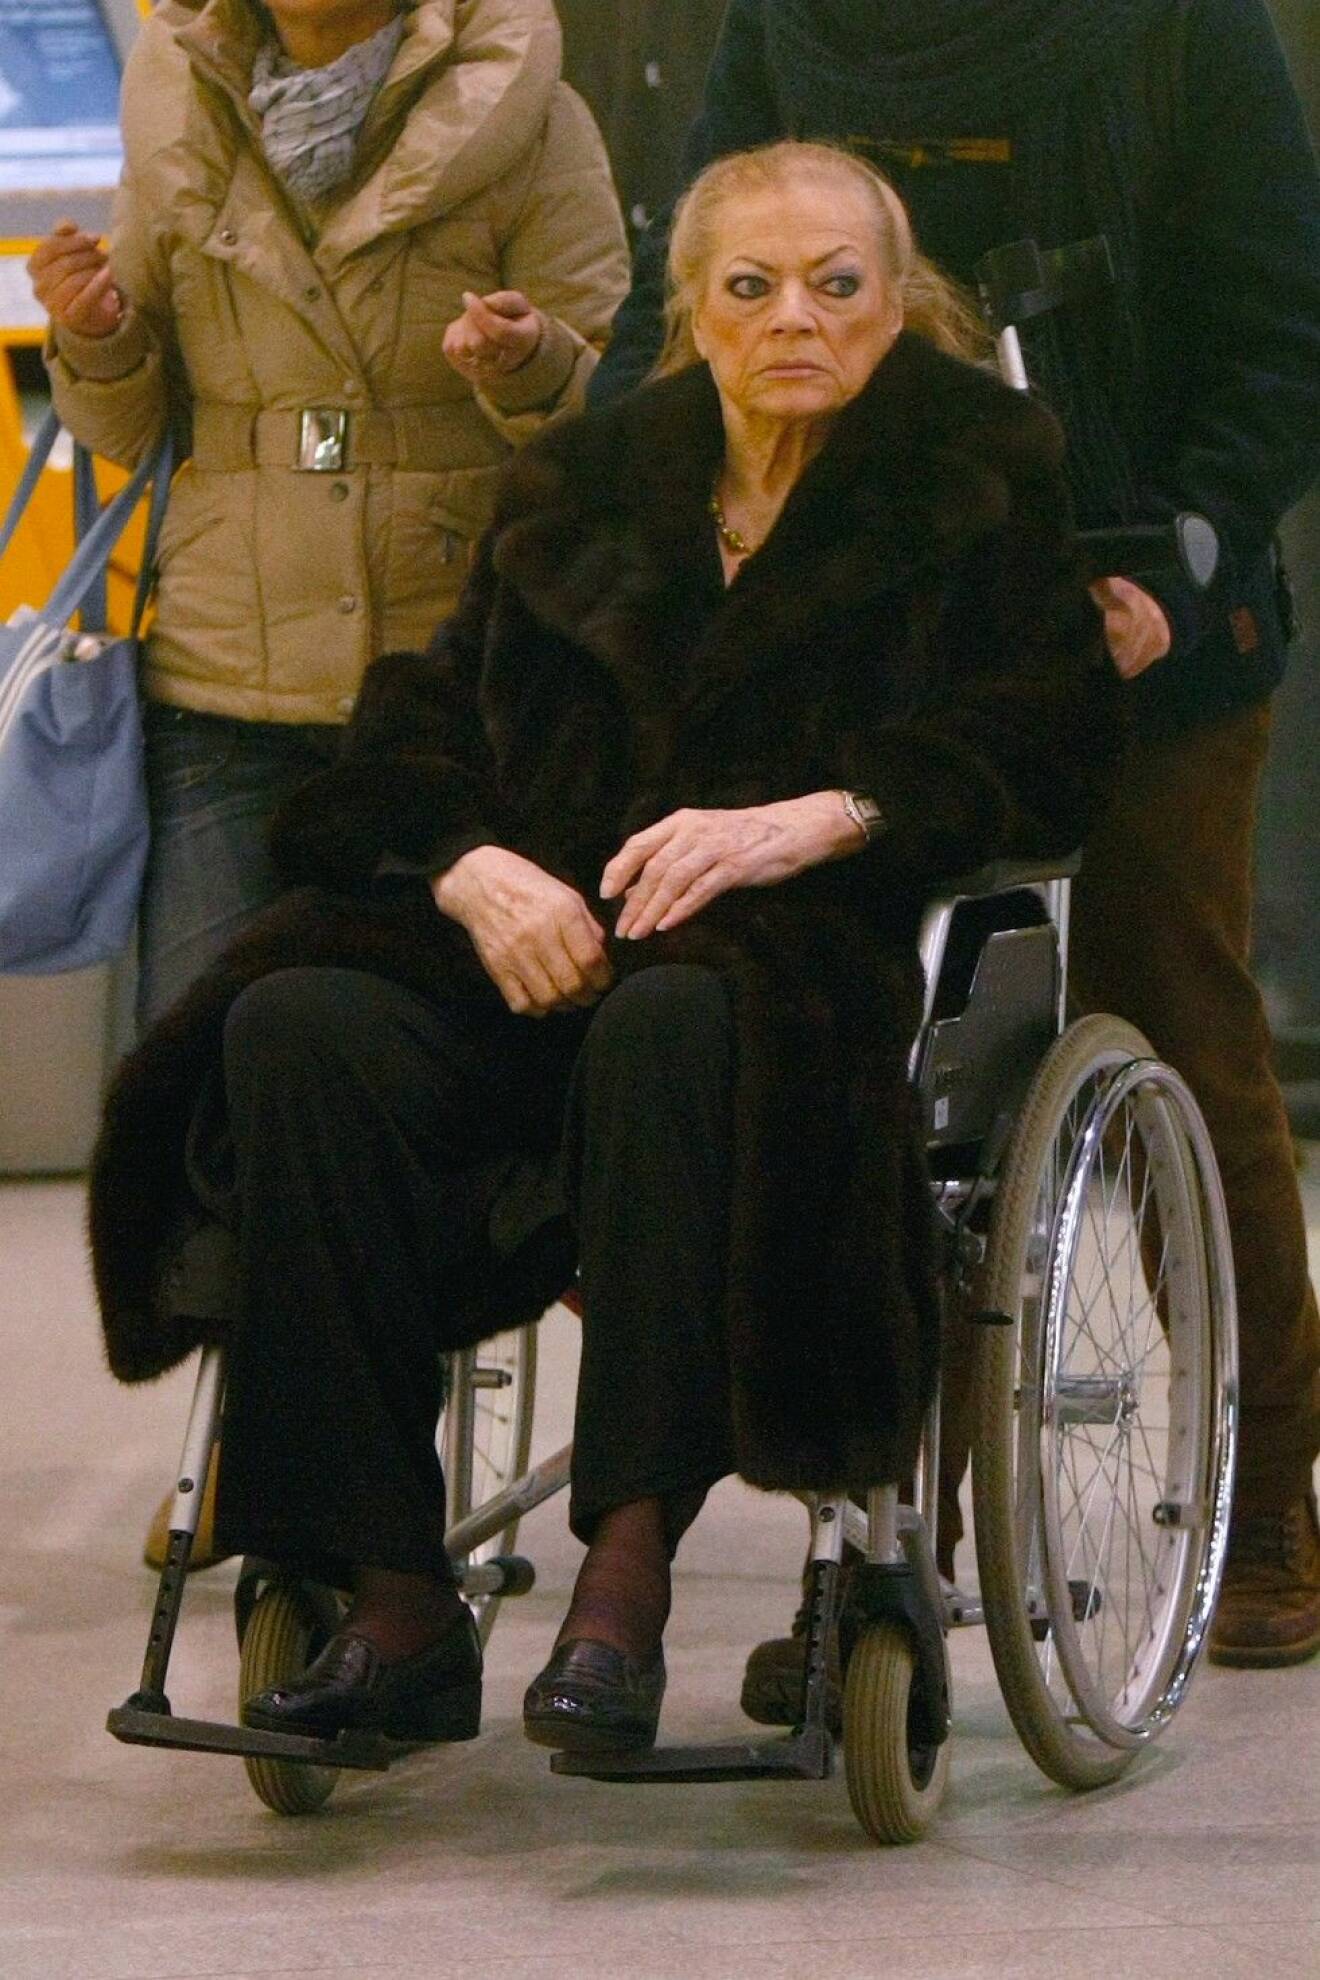 Anita Ekberg checking in for a flight at Tegel airport after attending the 63rd Berlin International Film Festival (Berlinale). Where: Berlin, Germany When: 14 Feb 2013 Credit: WENN